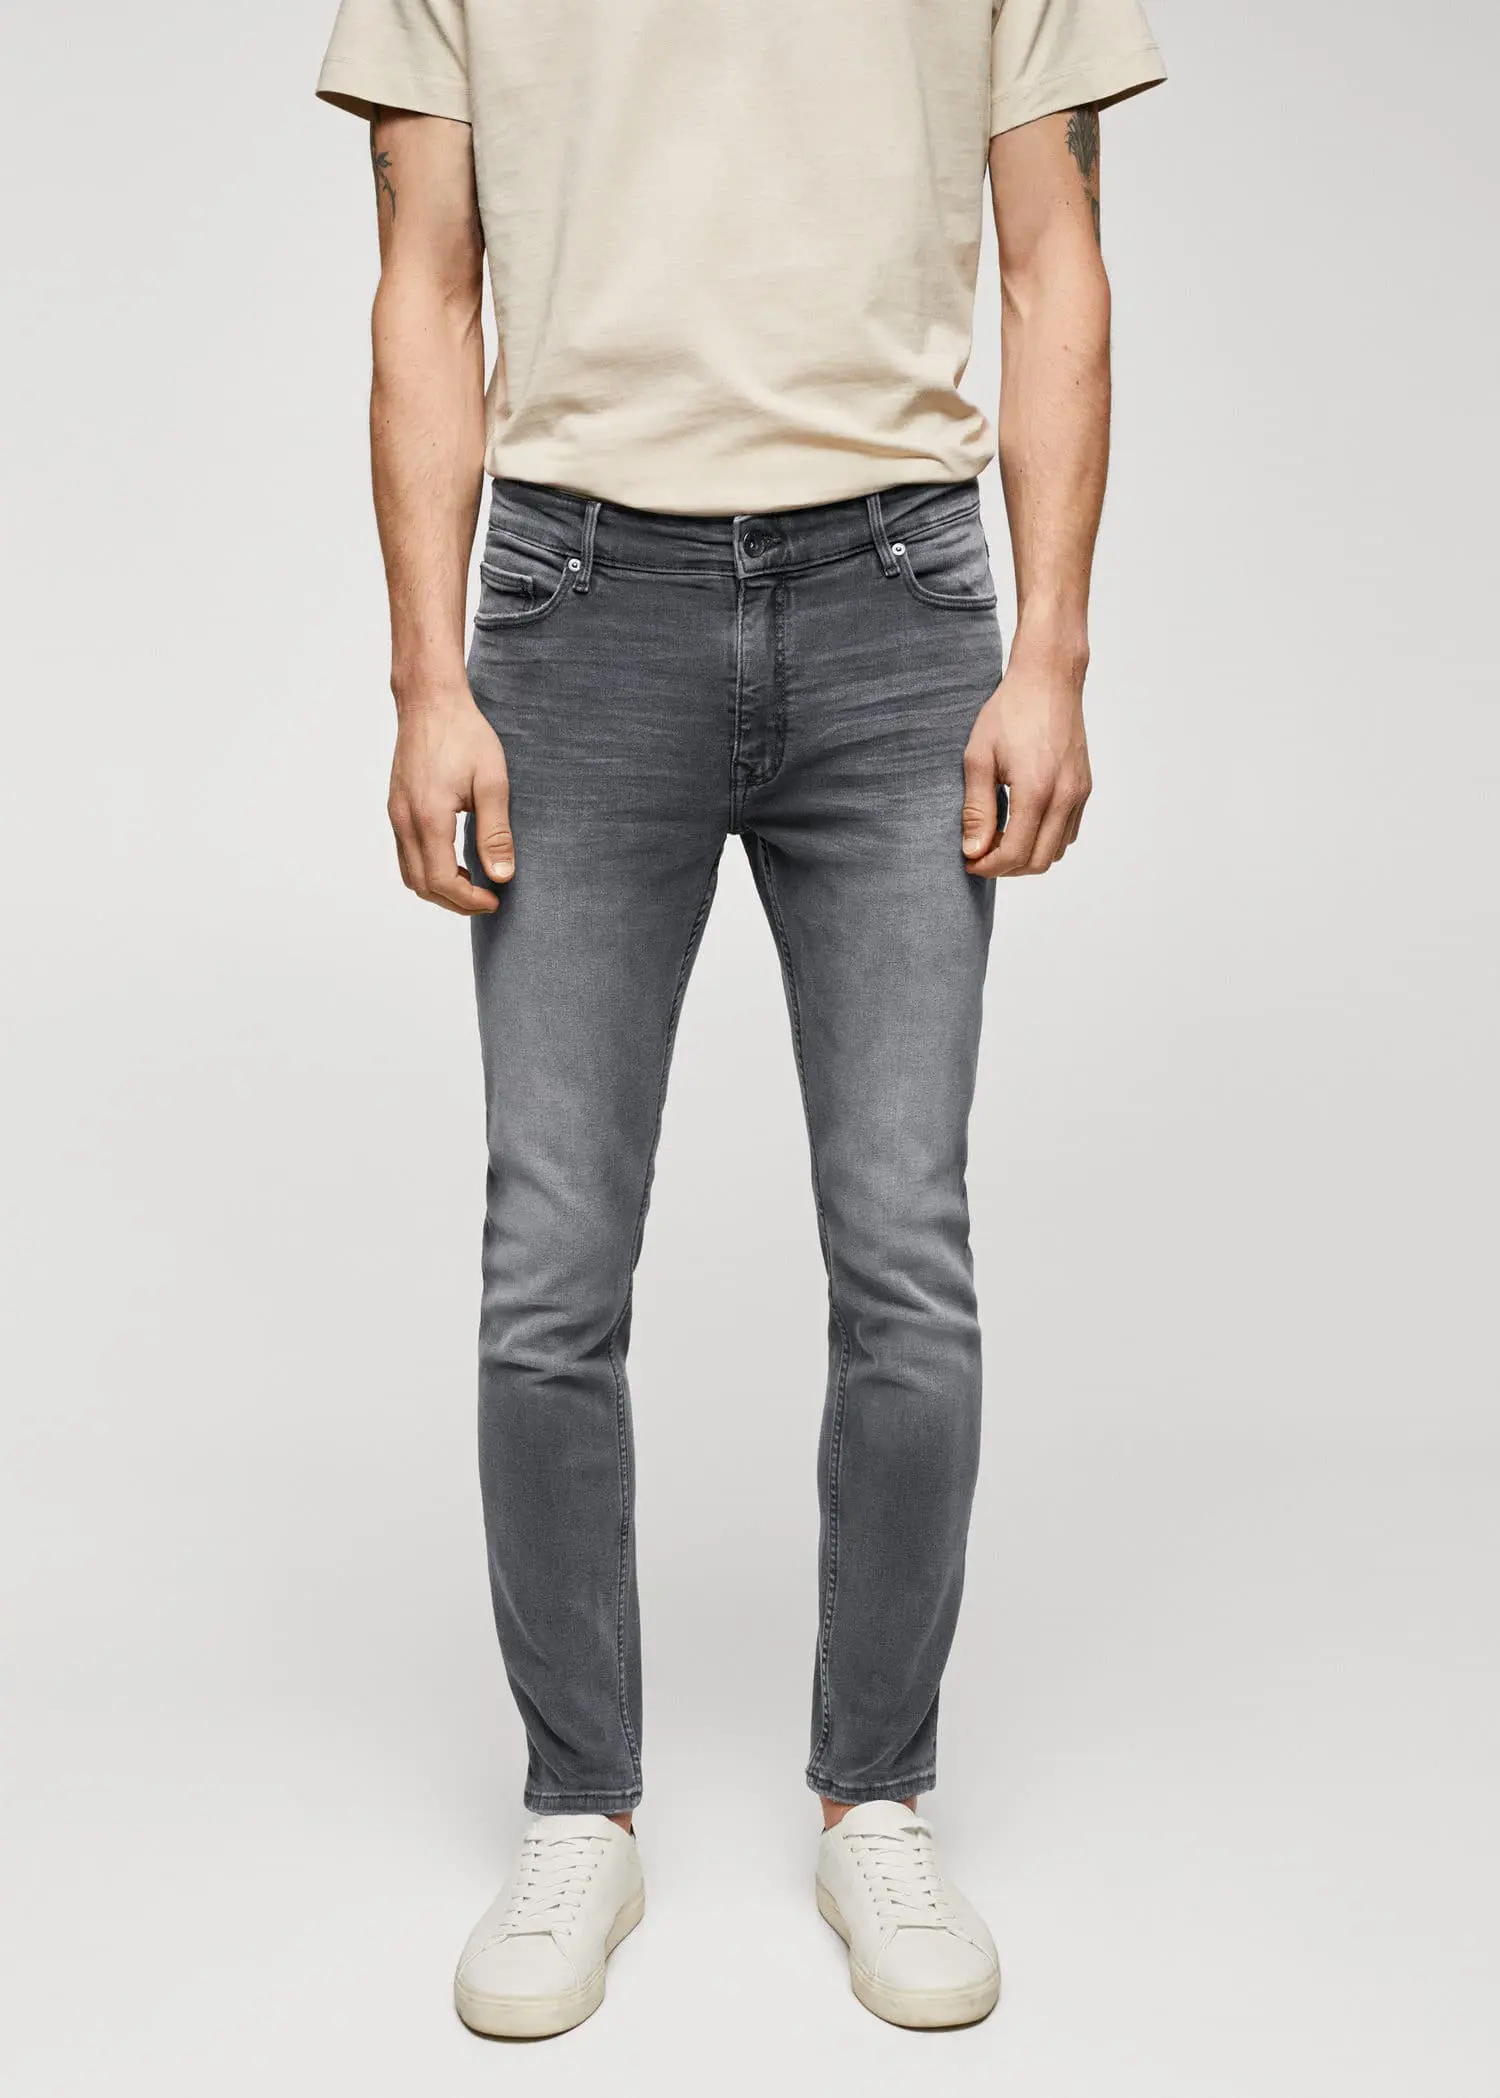 Mango Jude skinny-fit jeans. a man wearing a pair of grey jeans. 